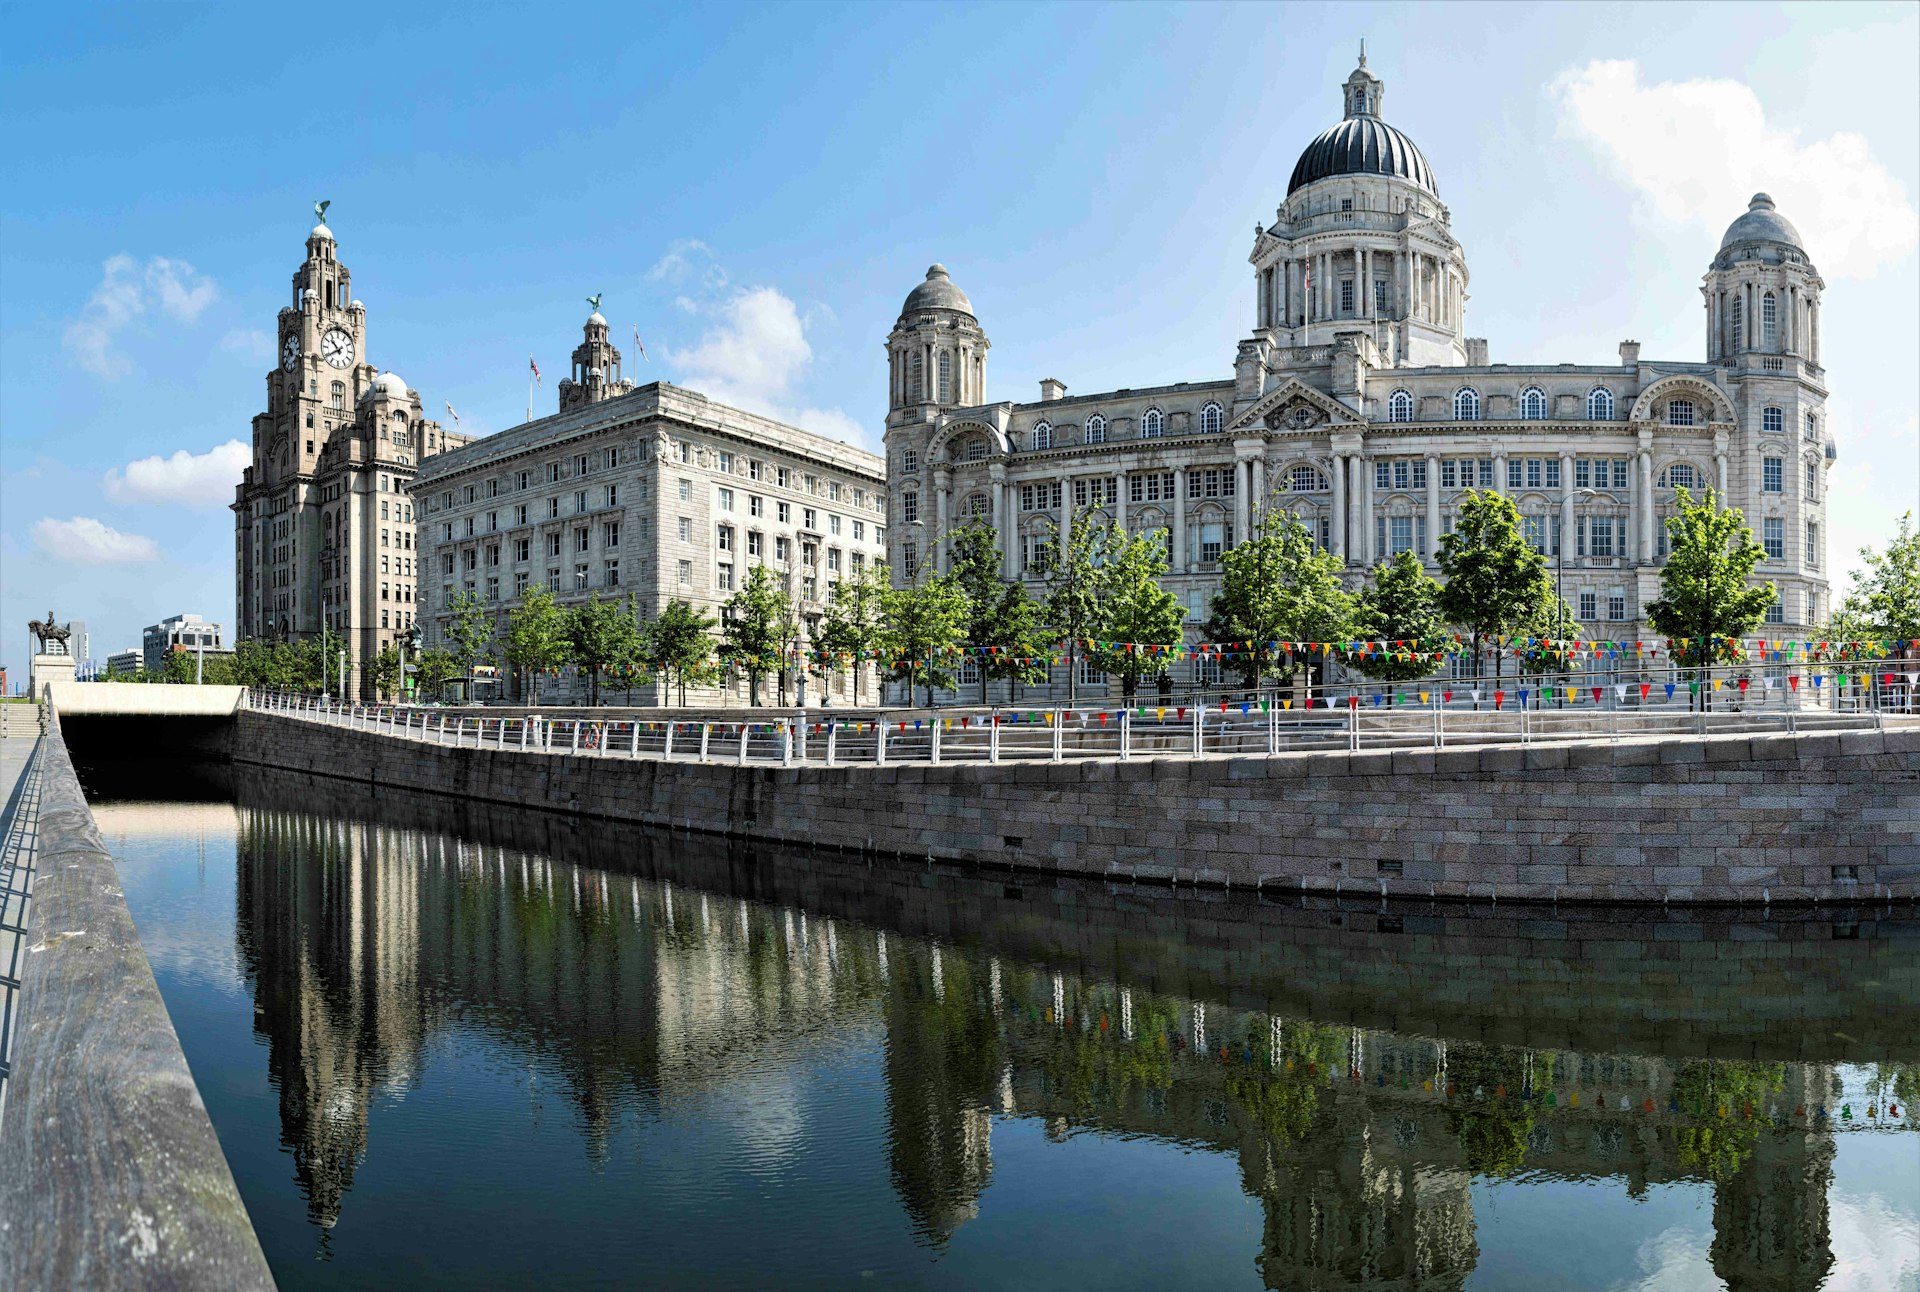 The Three Graces, Liverpool. The grey-stone buildings are reflected in the river water below and lined with luscious green trees as well as colourful bunting. 